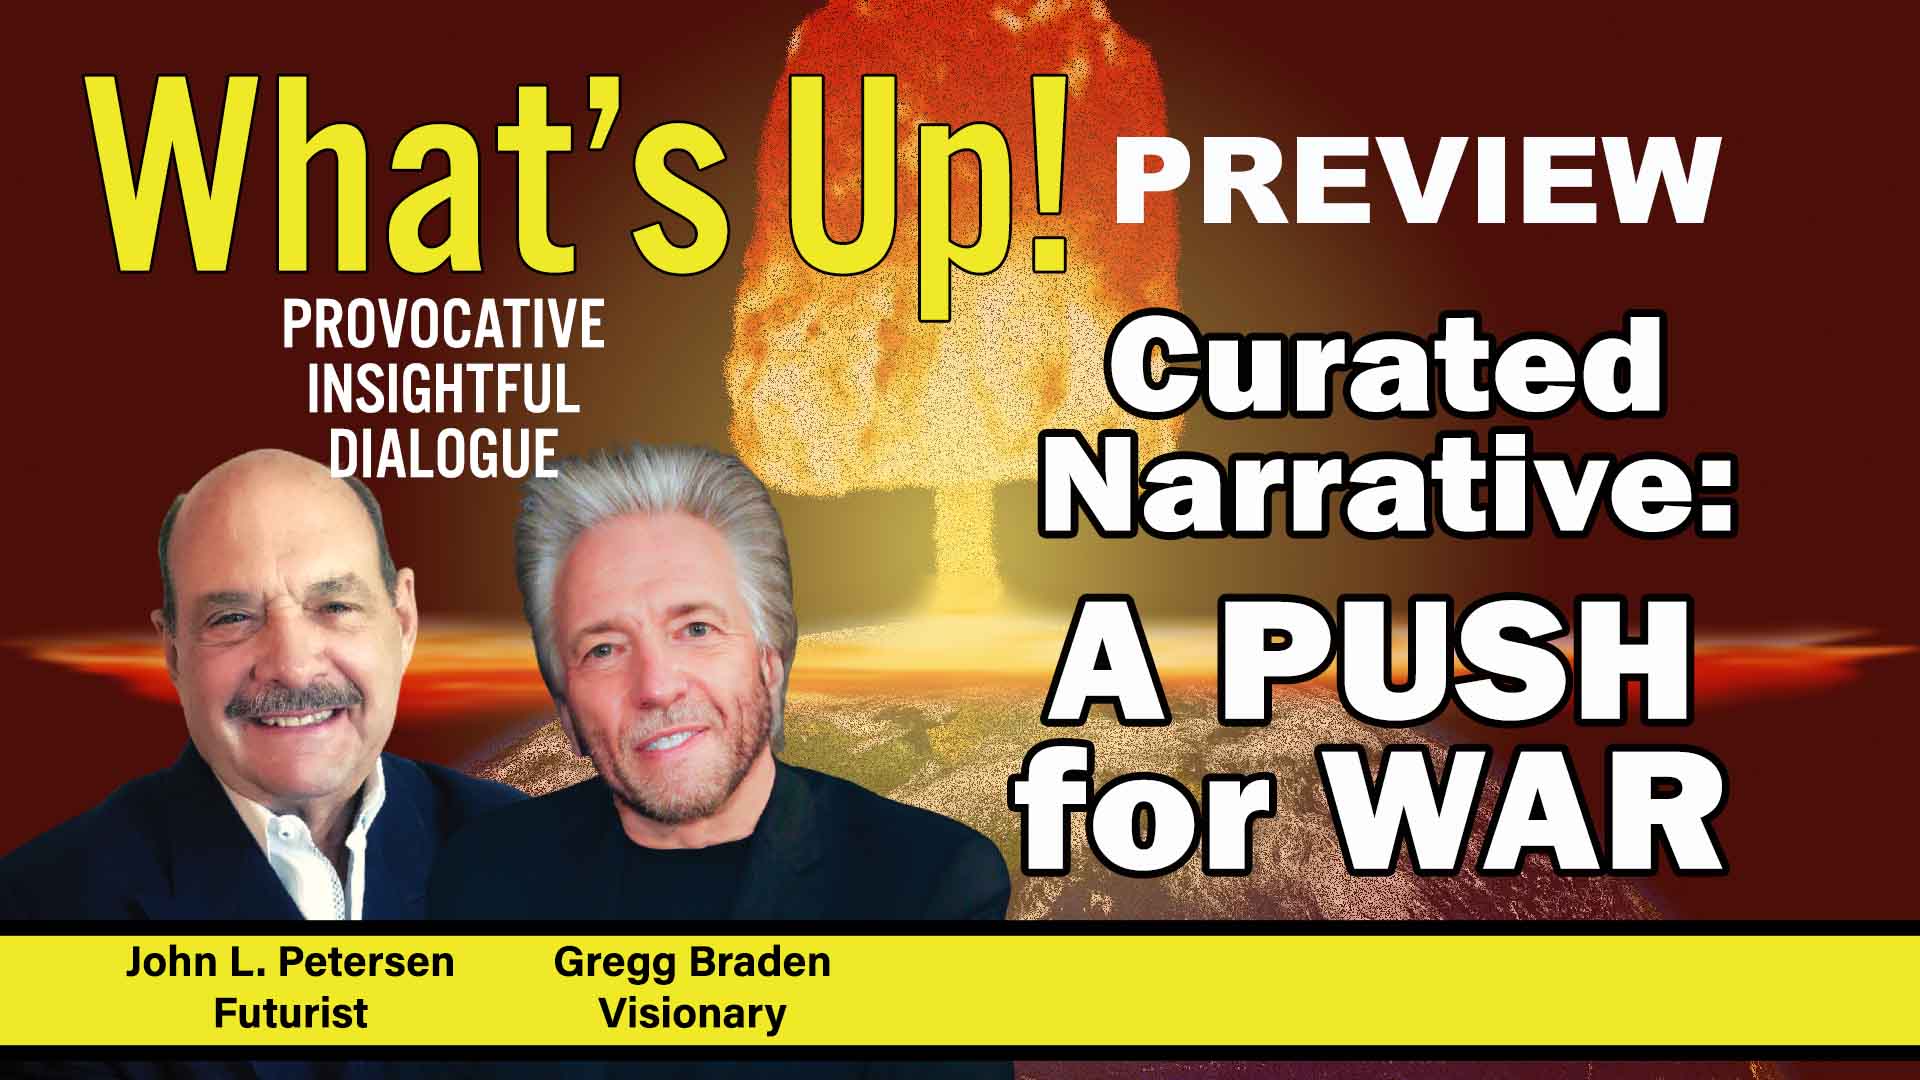 What's Up! Preview with Gregg Braden, John Petersen, Curated Narrative: A Push for War